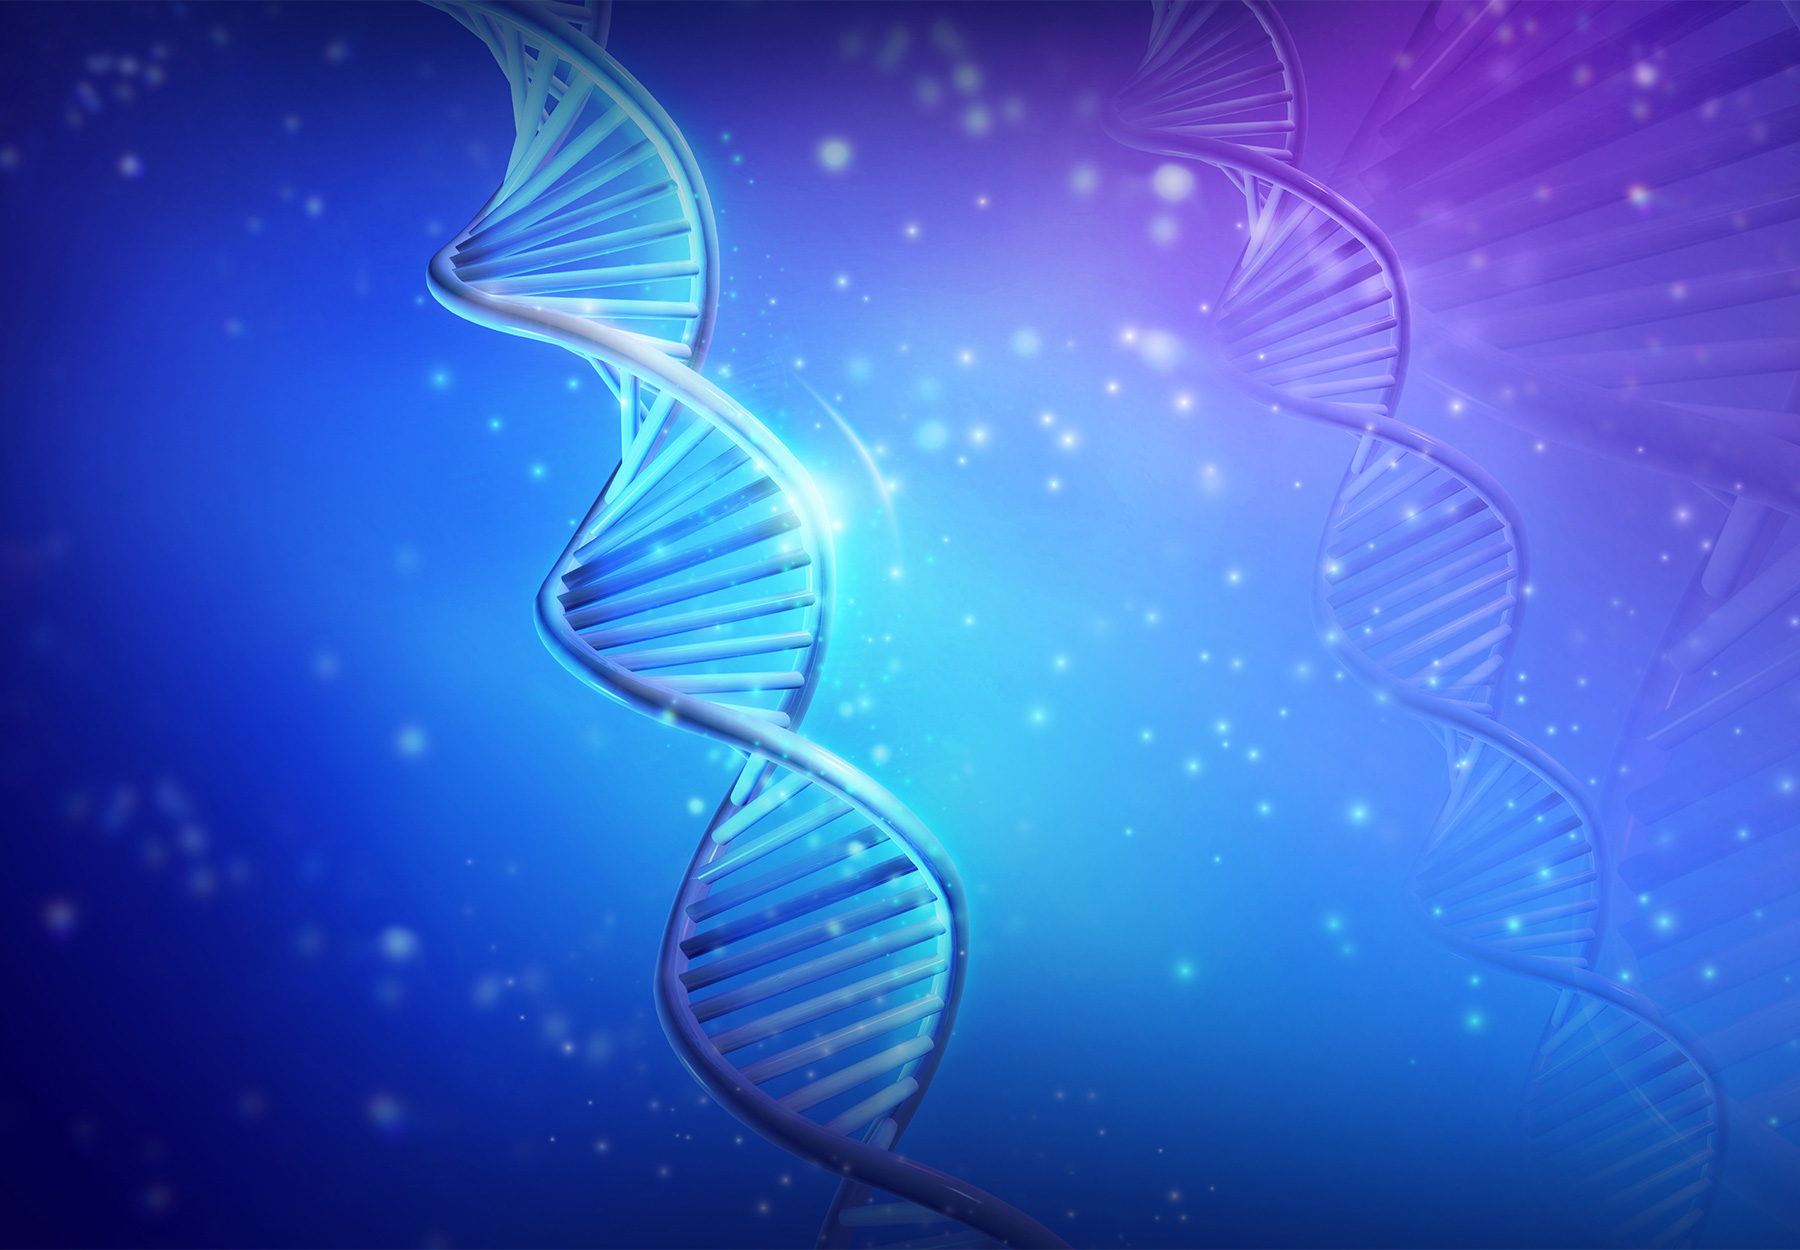 Blue and purple image of DNA helix.